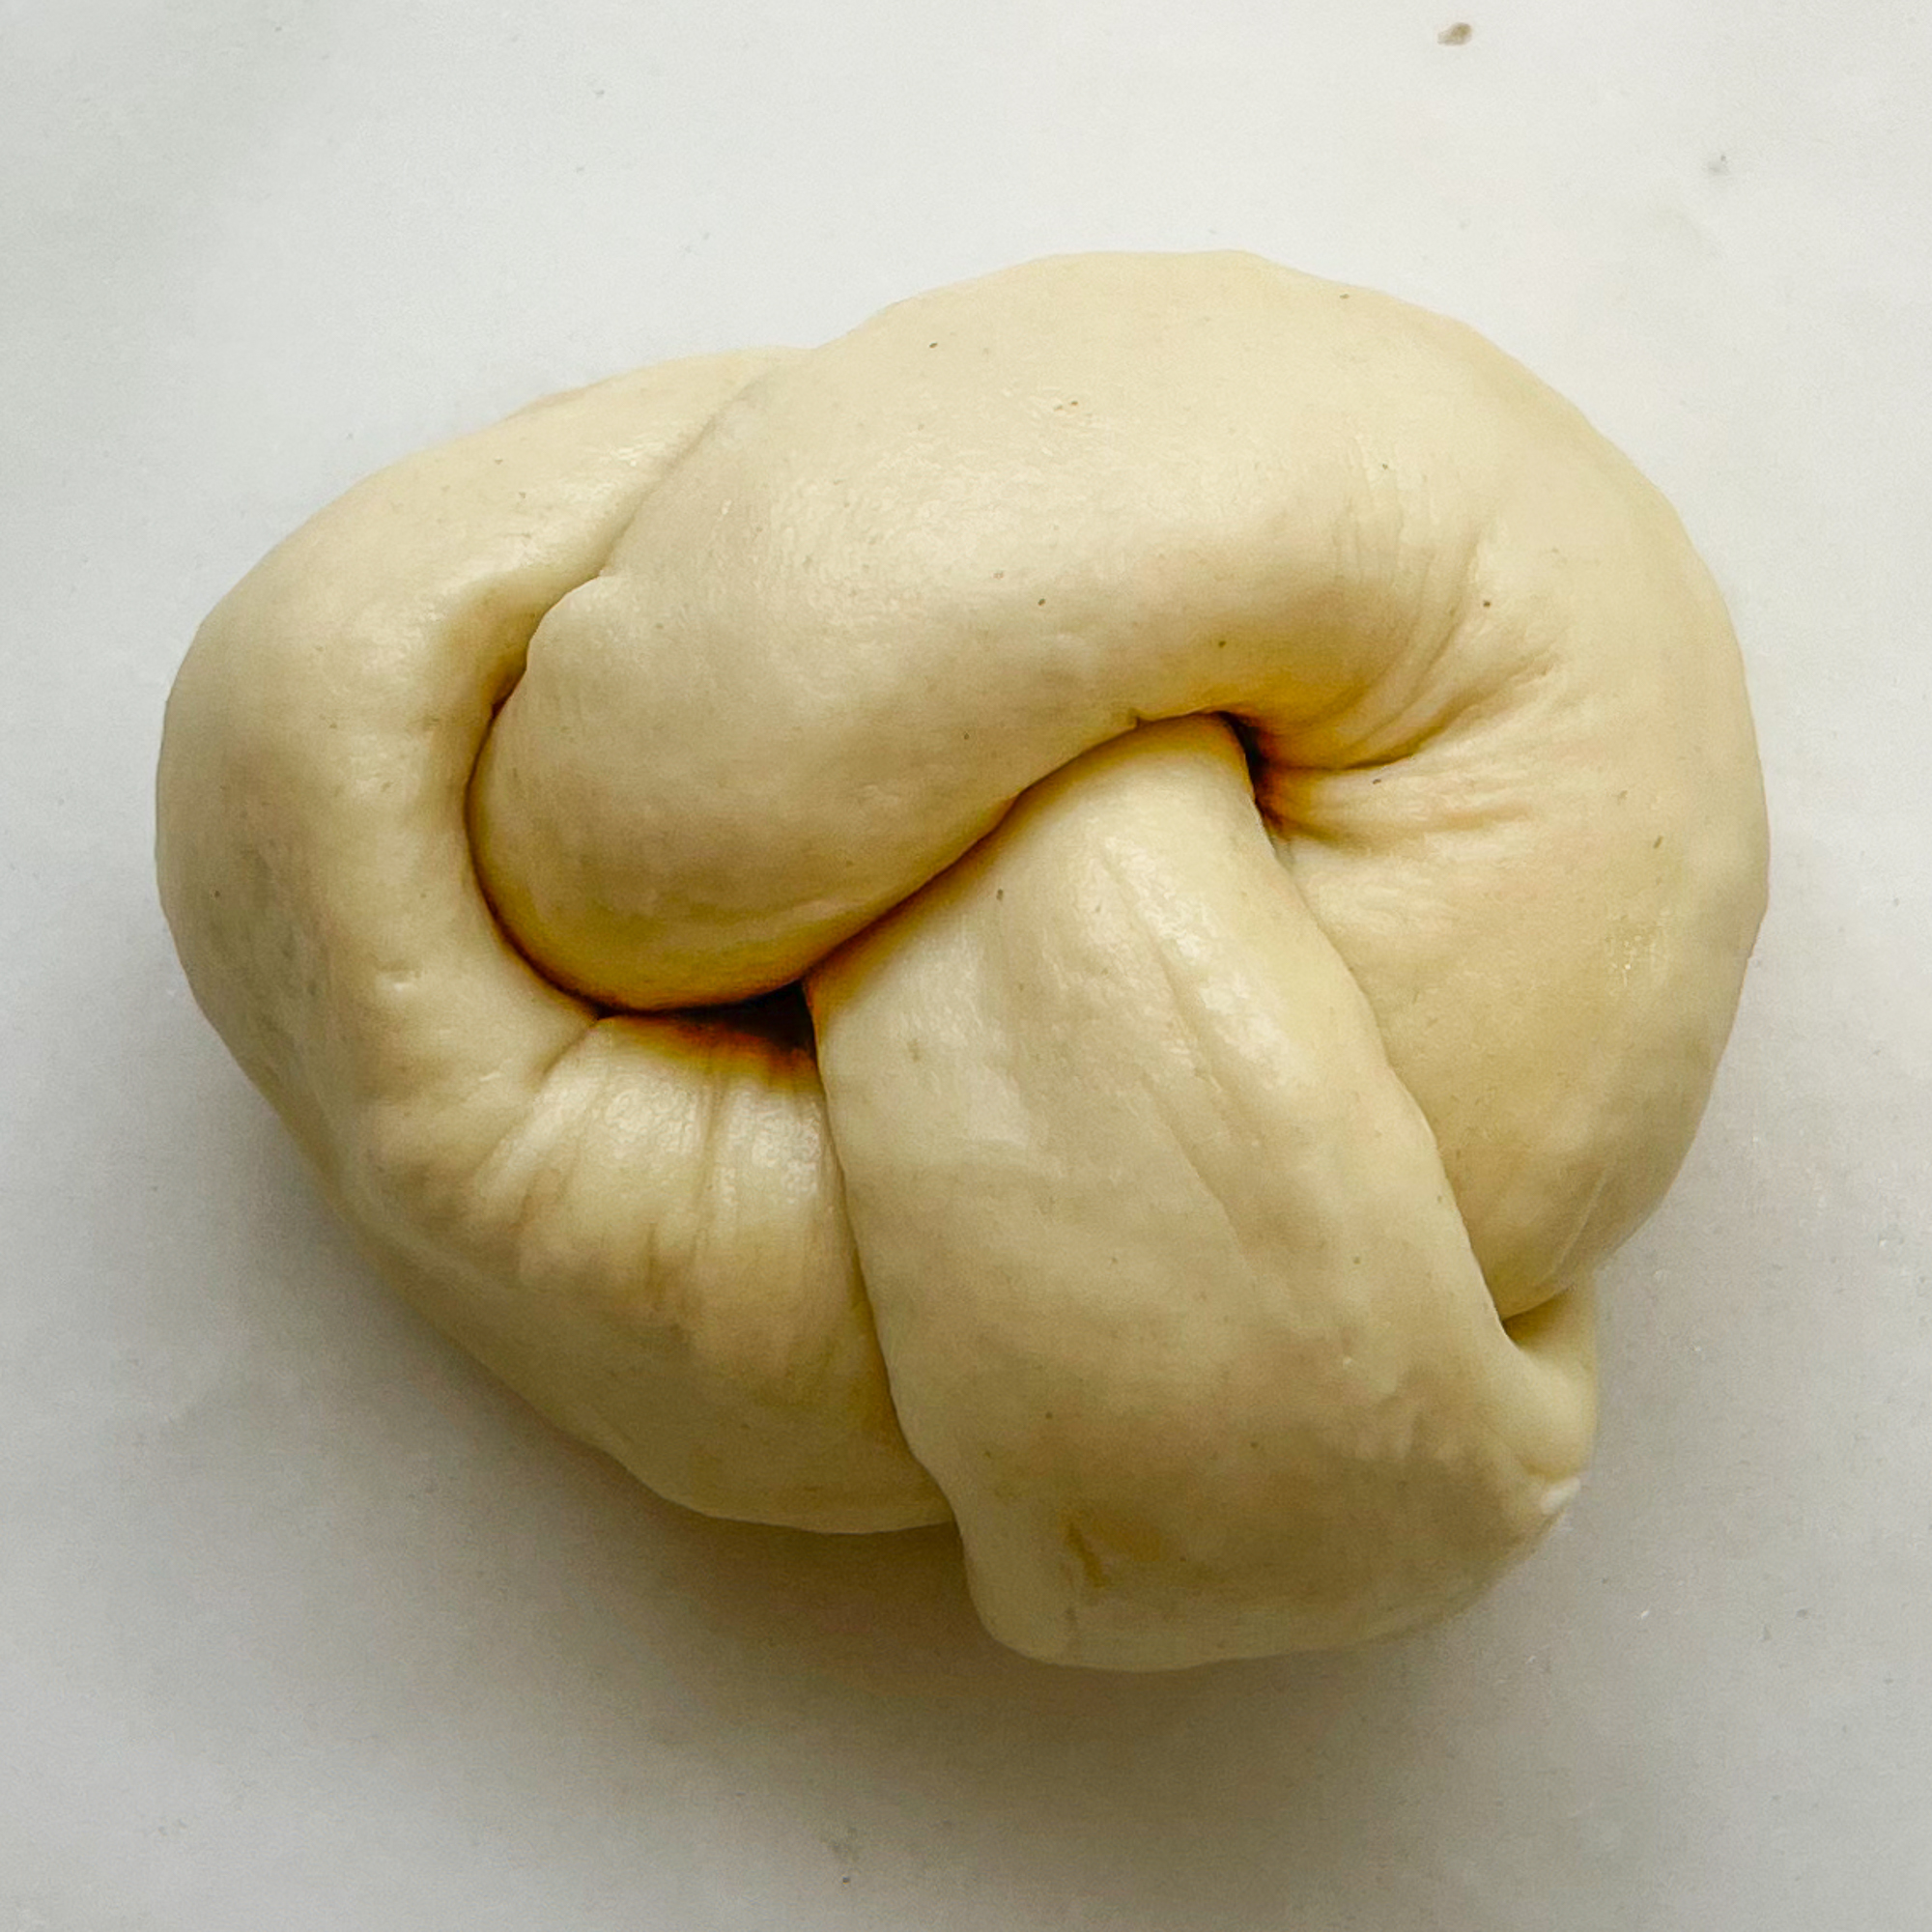 one sourdough discard garlic knot ready to be baked